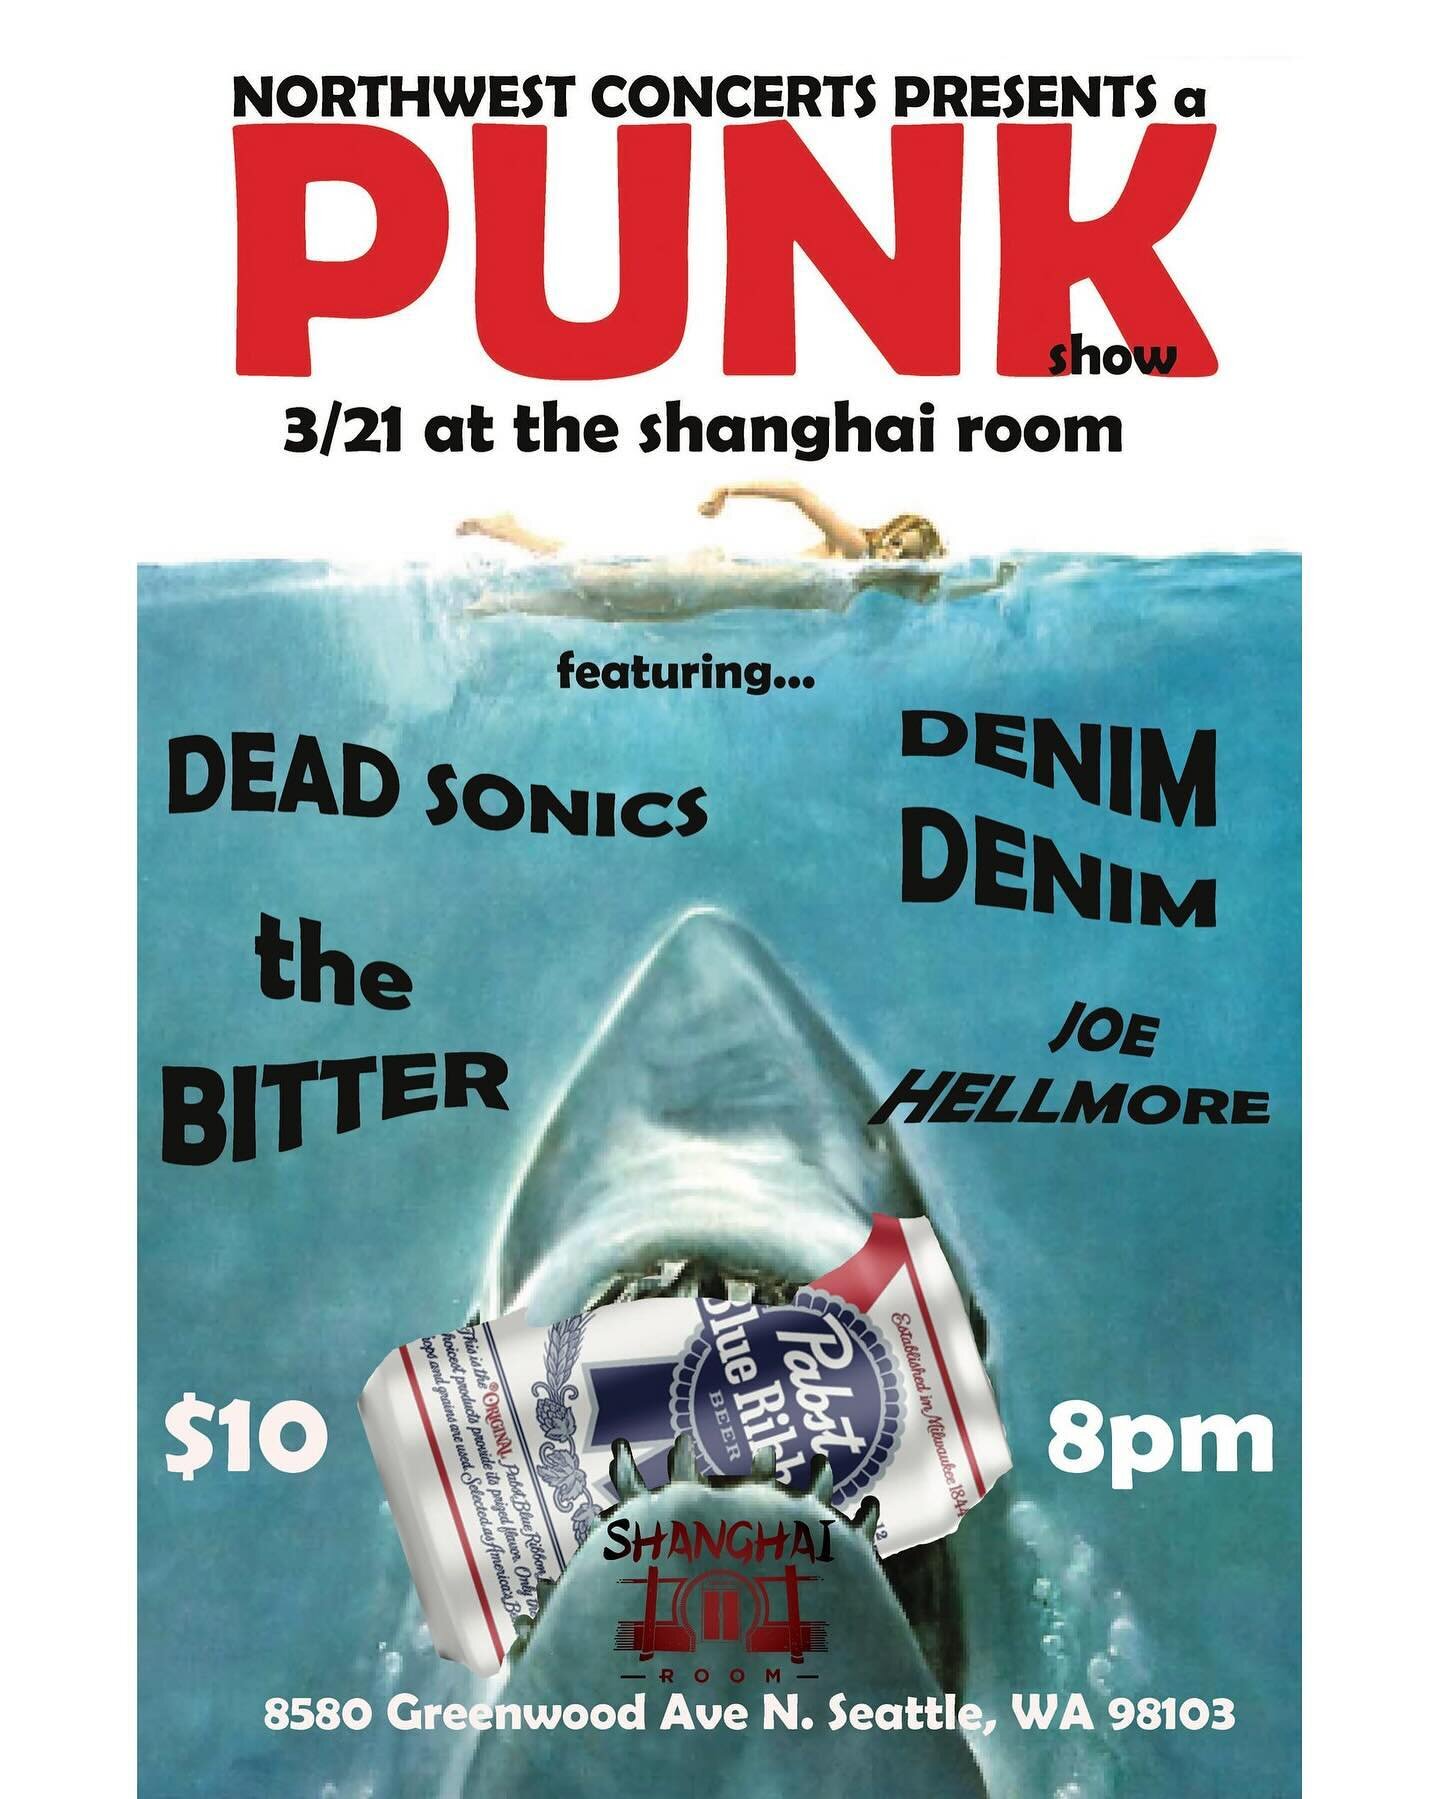 Thursday 3/21! A night of punk rock. Doors at 7pm / 21+ / $10

#shanghairoom #shanghairoomshows #seattlemusic #seattleshows #seattlebands #theshanghairoom